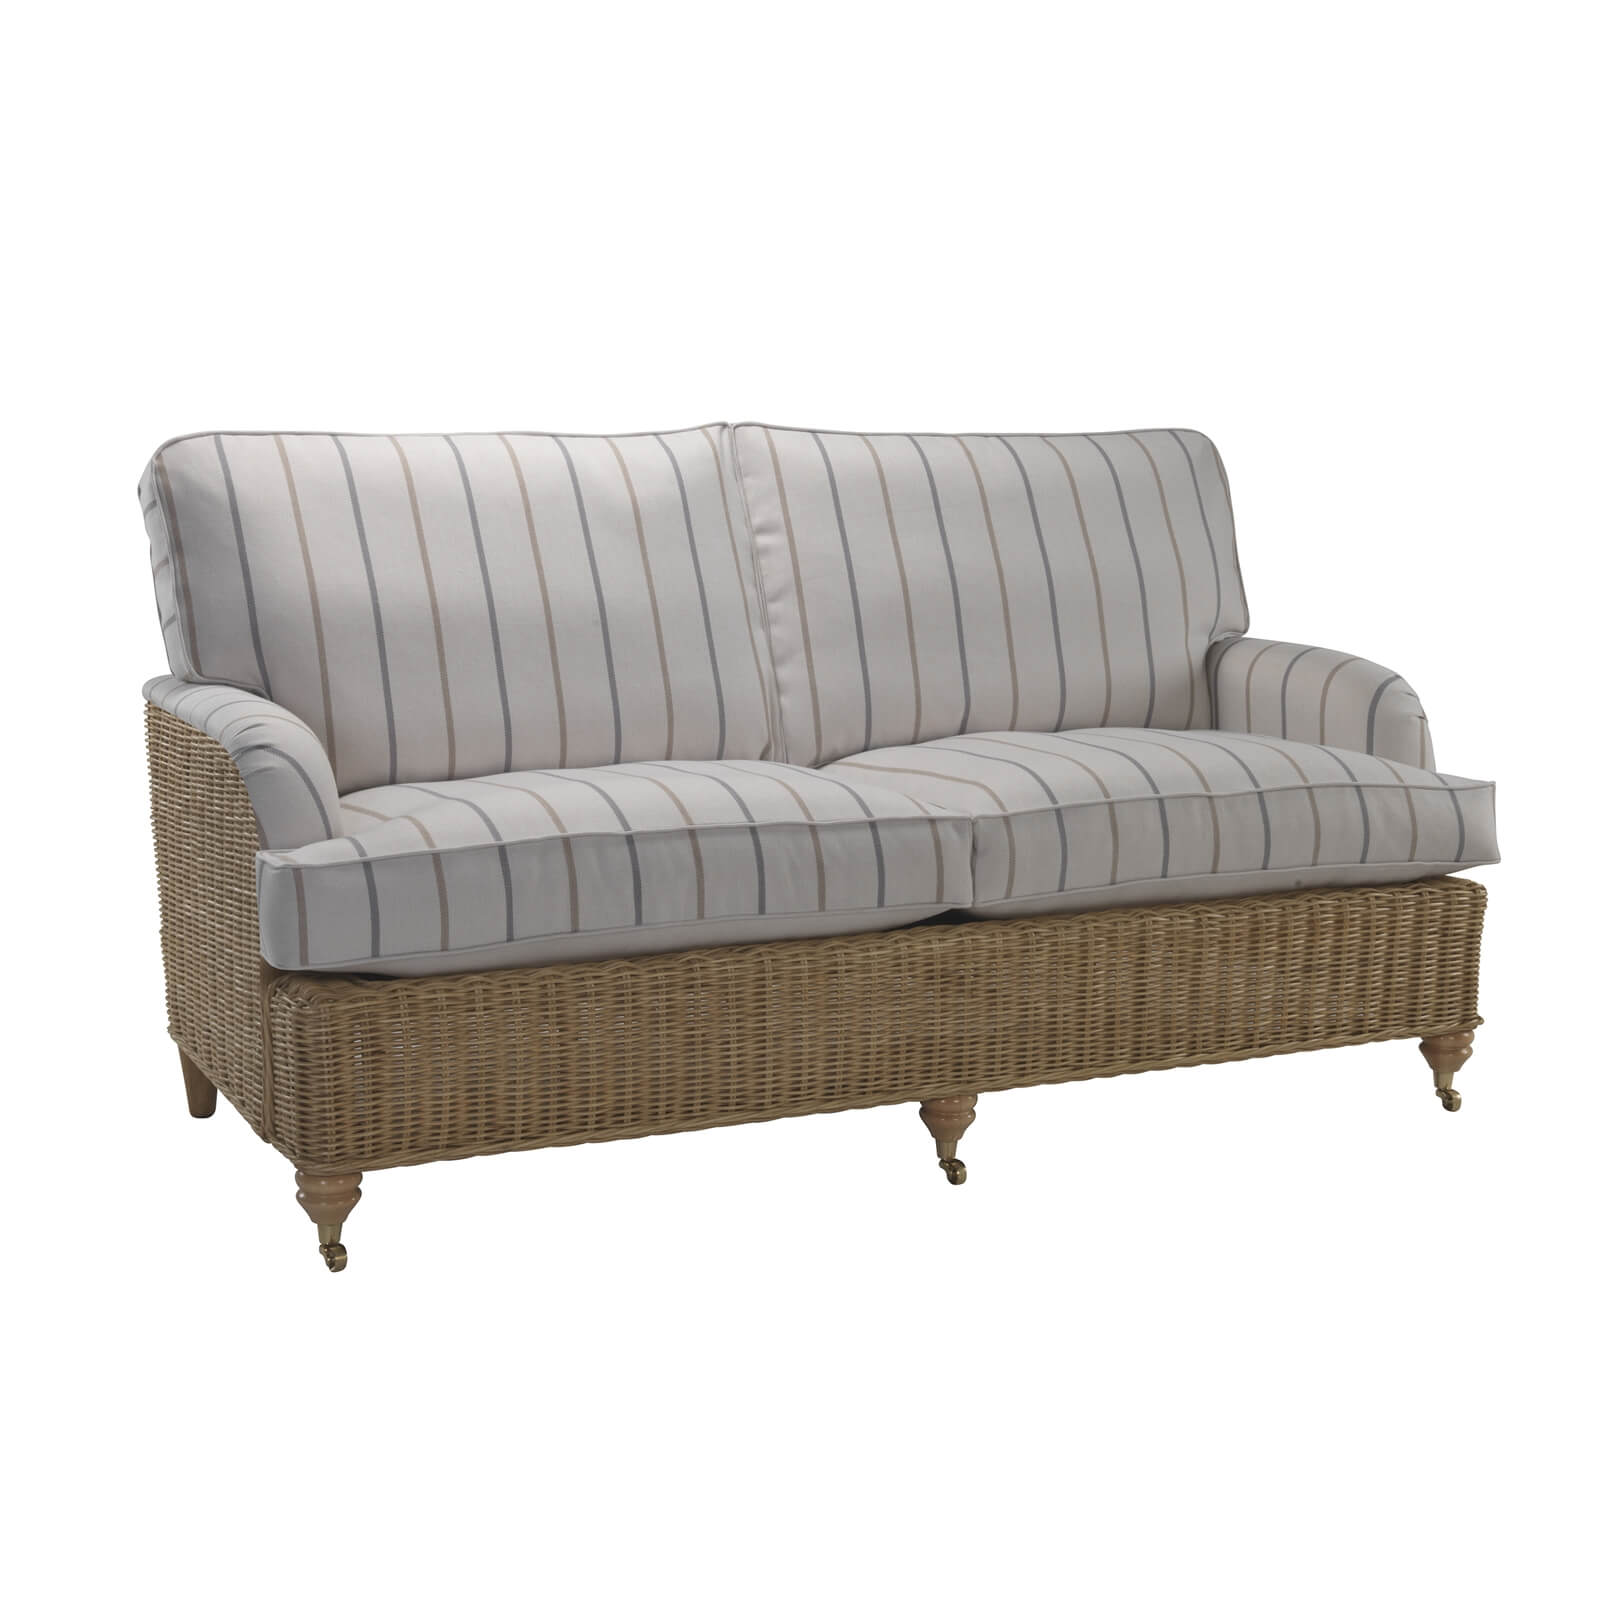 Seville 3 Seater Sofa In Linen Taupe